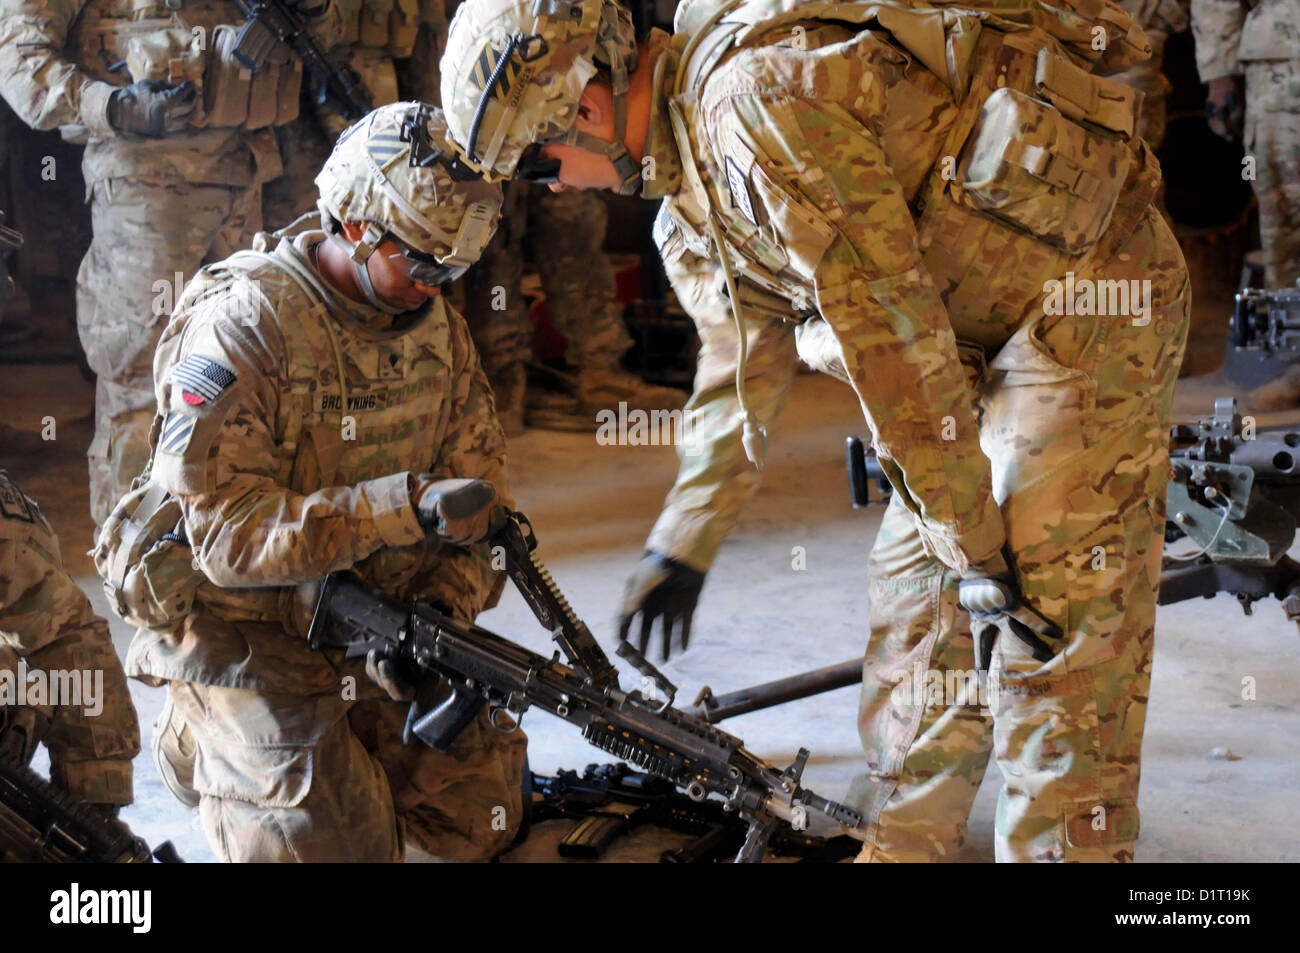 FORWARD OPERATING BASE SMART, Afghanistan -- U.S. Army Sgt. Eric Huerta, a gunner with the Zabul Provincial Reconstruction Team, assists U.S. Army Spc. Terrell Browning, Z PRT security force, with clearing the M249 Squad Automatic Weapon during a safety stand down day at Forward Operating Base Smart, Afghanistan, Jan. 3. 2013  Throughout the day members of Z PRT participated in briefings and exercises focused on safety-related topics to include winter injuries, suicide prevention and vehicle safety. (U.S. Air Force by Senior Airman Patrice Clarke) Stock Photo